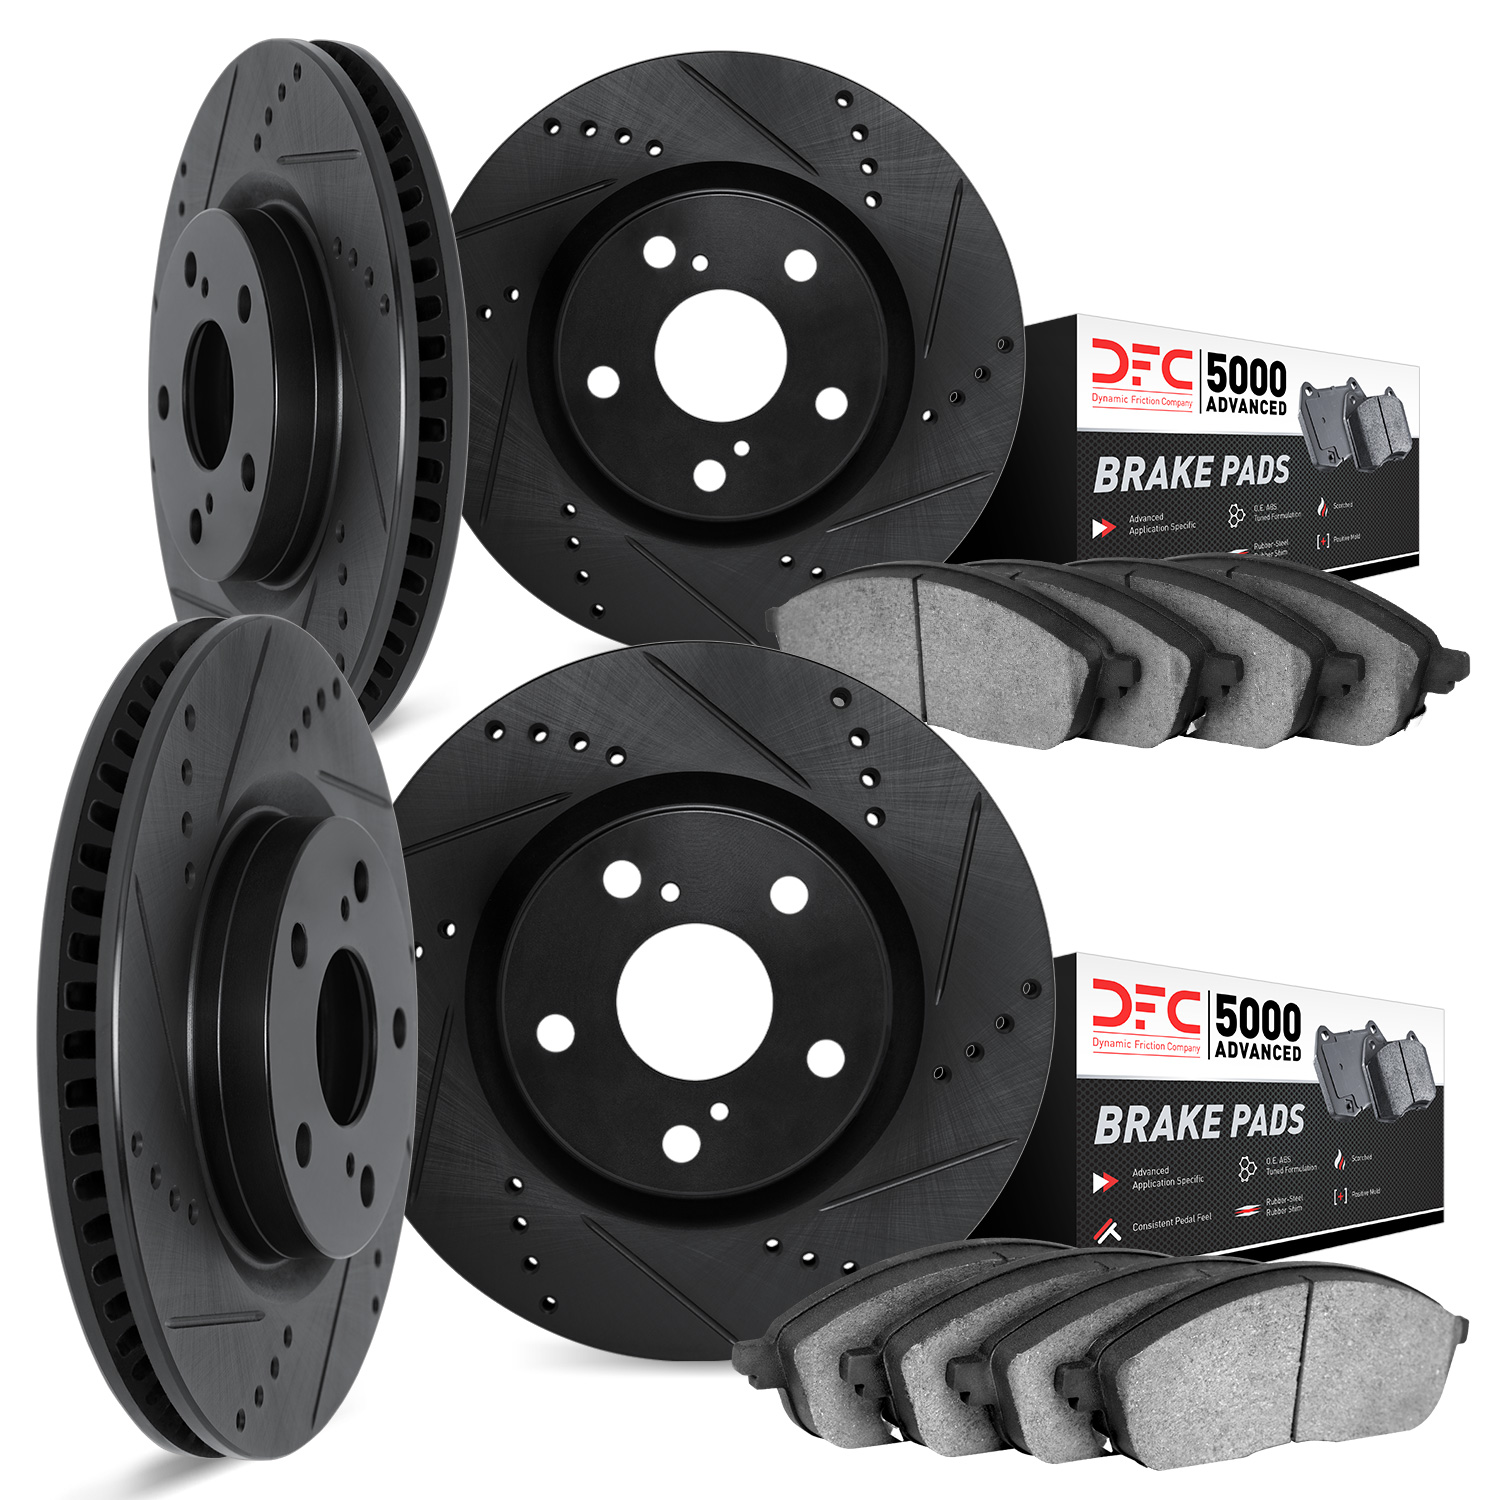 8504-67103 Drilled/Slotted Brake Rotors w/5000 Advanced Brake Pads Kit [Black], 2011-2019 Infiniti/Nissan, Position: Front and R